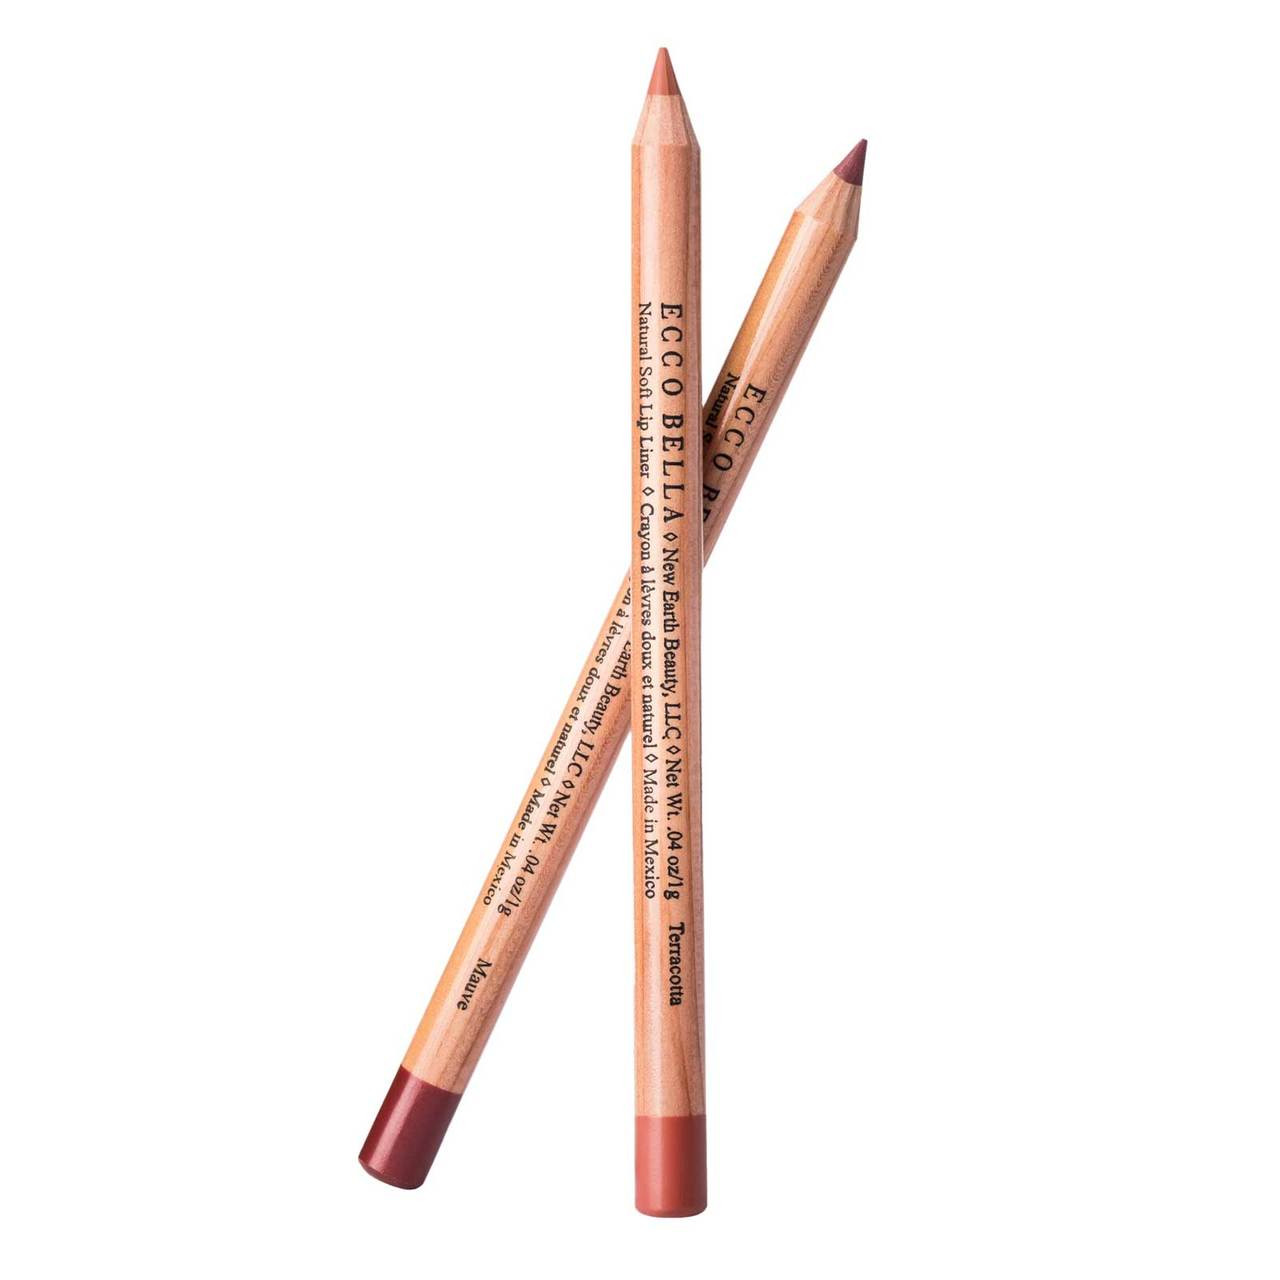 Trends dropshipping pencil organic lip free liner reviews evening wear